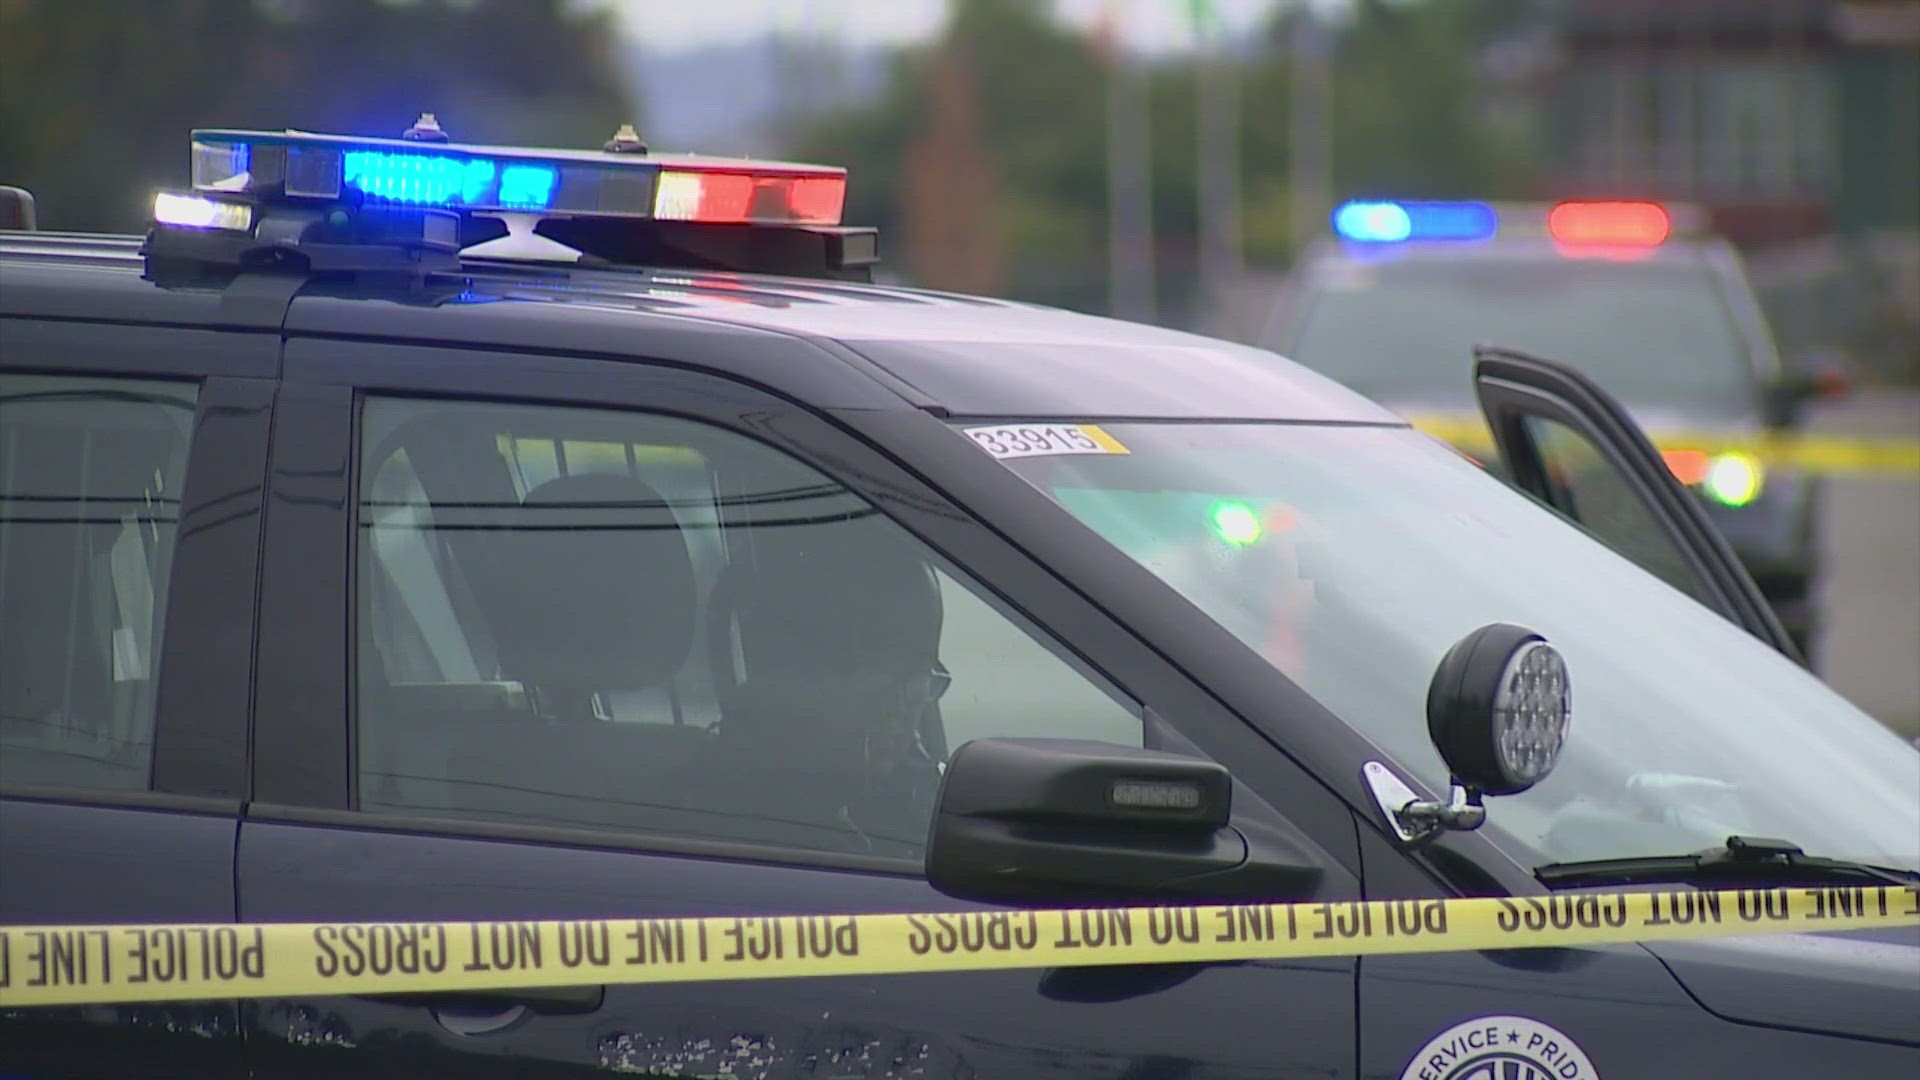 Investigators learned the elderly man drove himself to the SODO area, so it is unclear where the shooting occurred.